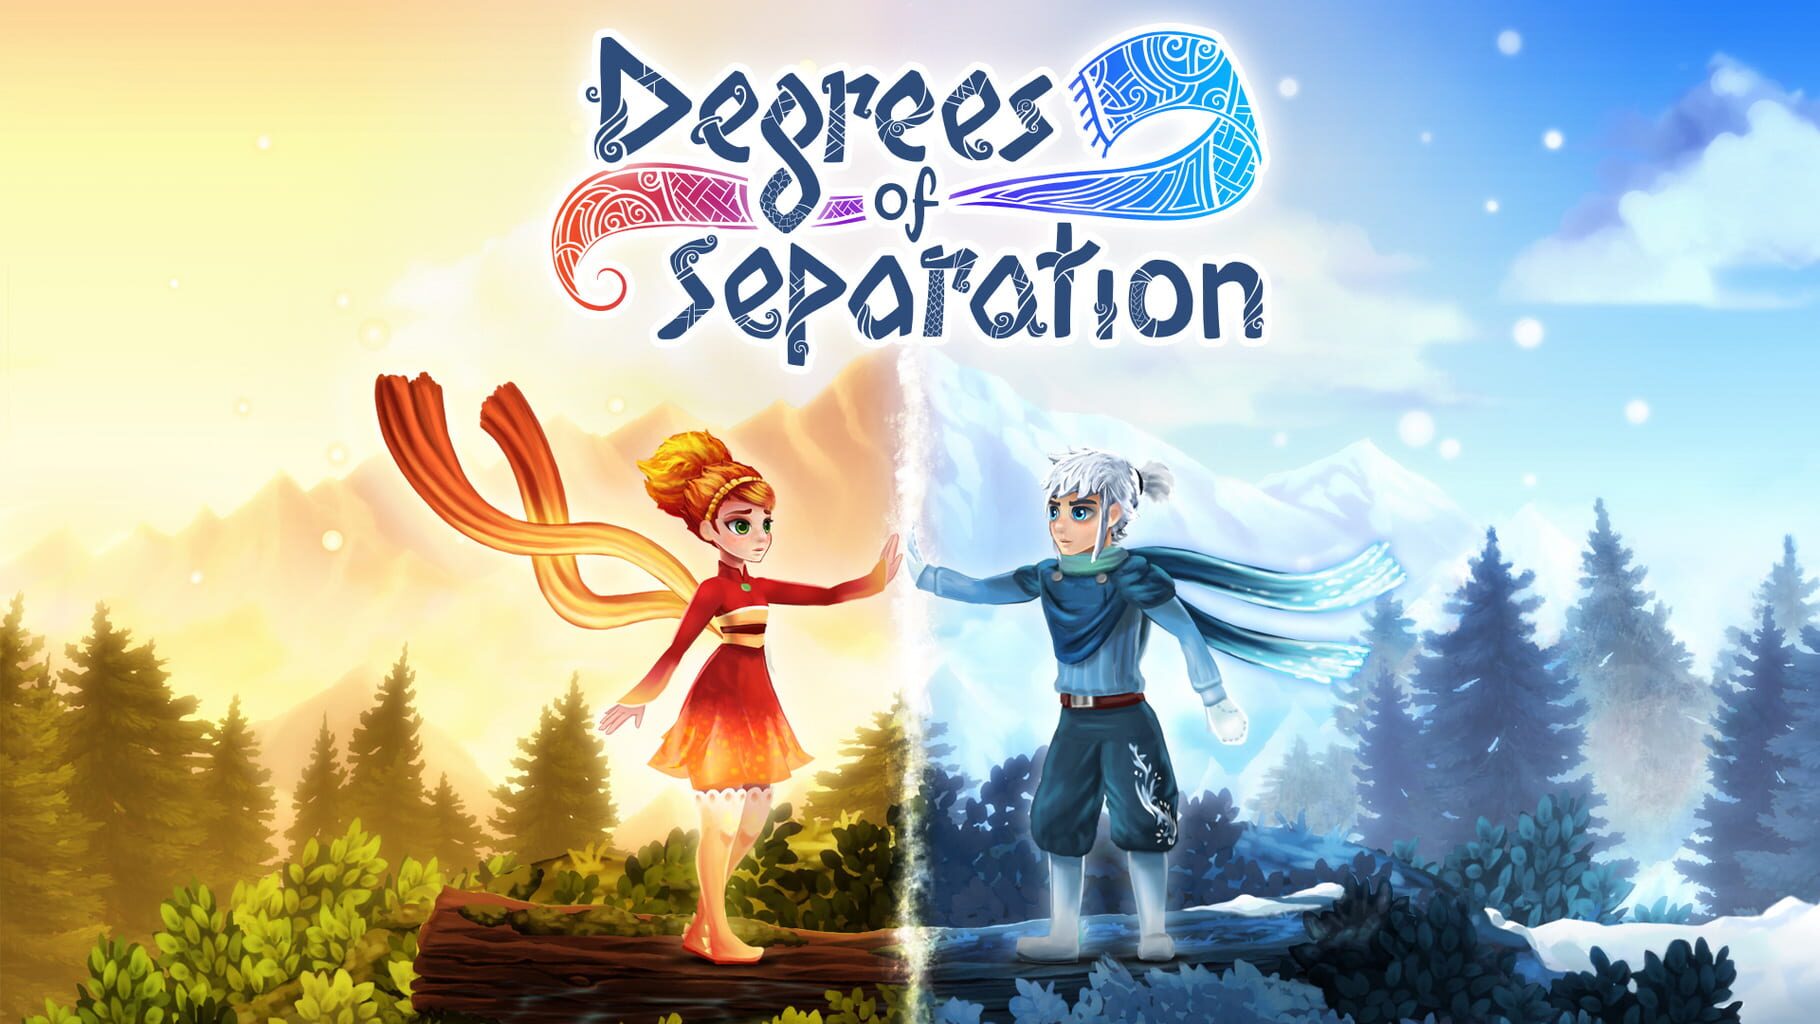 Degrees of Separation Image